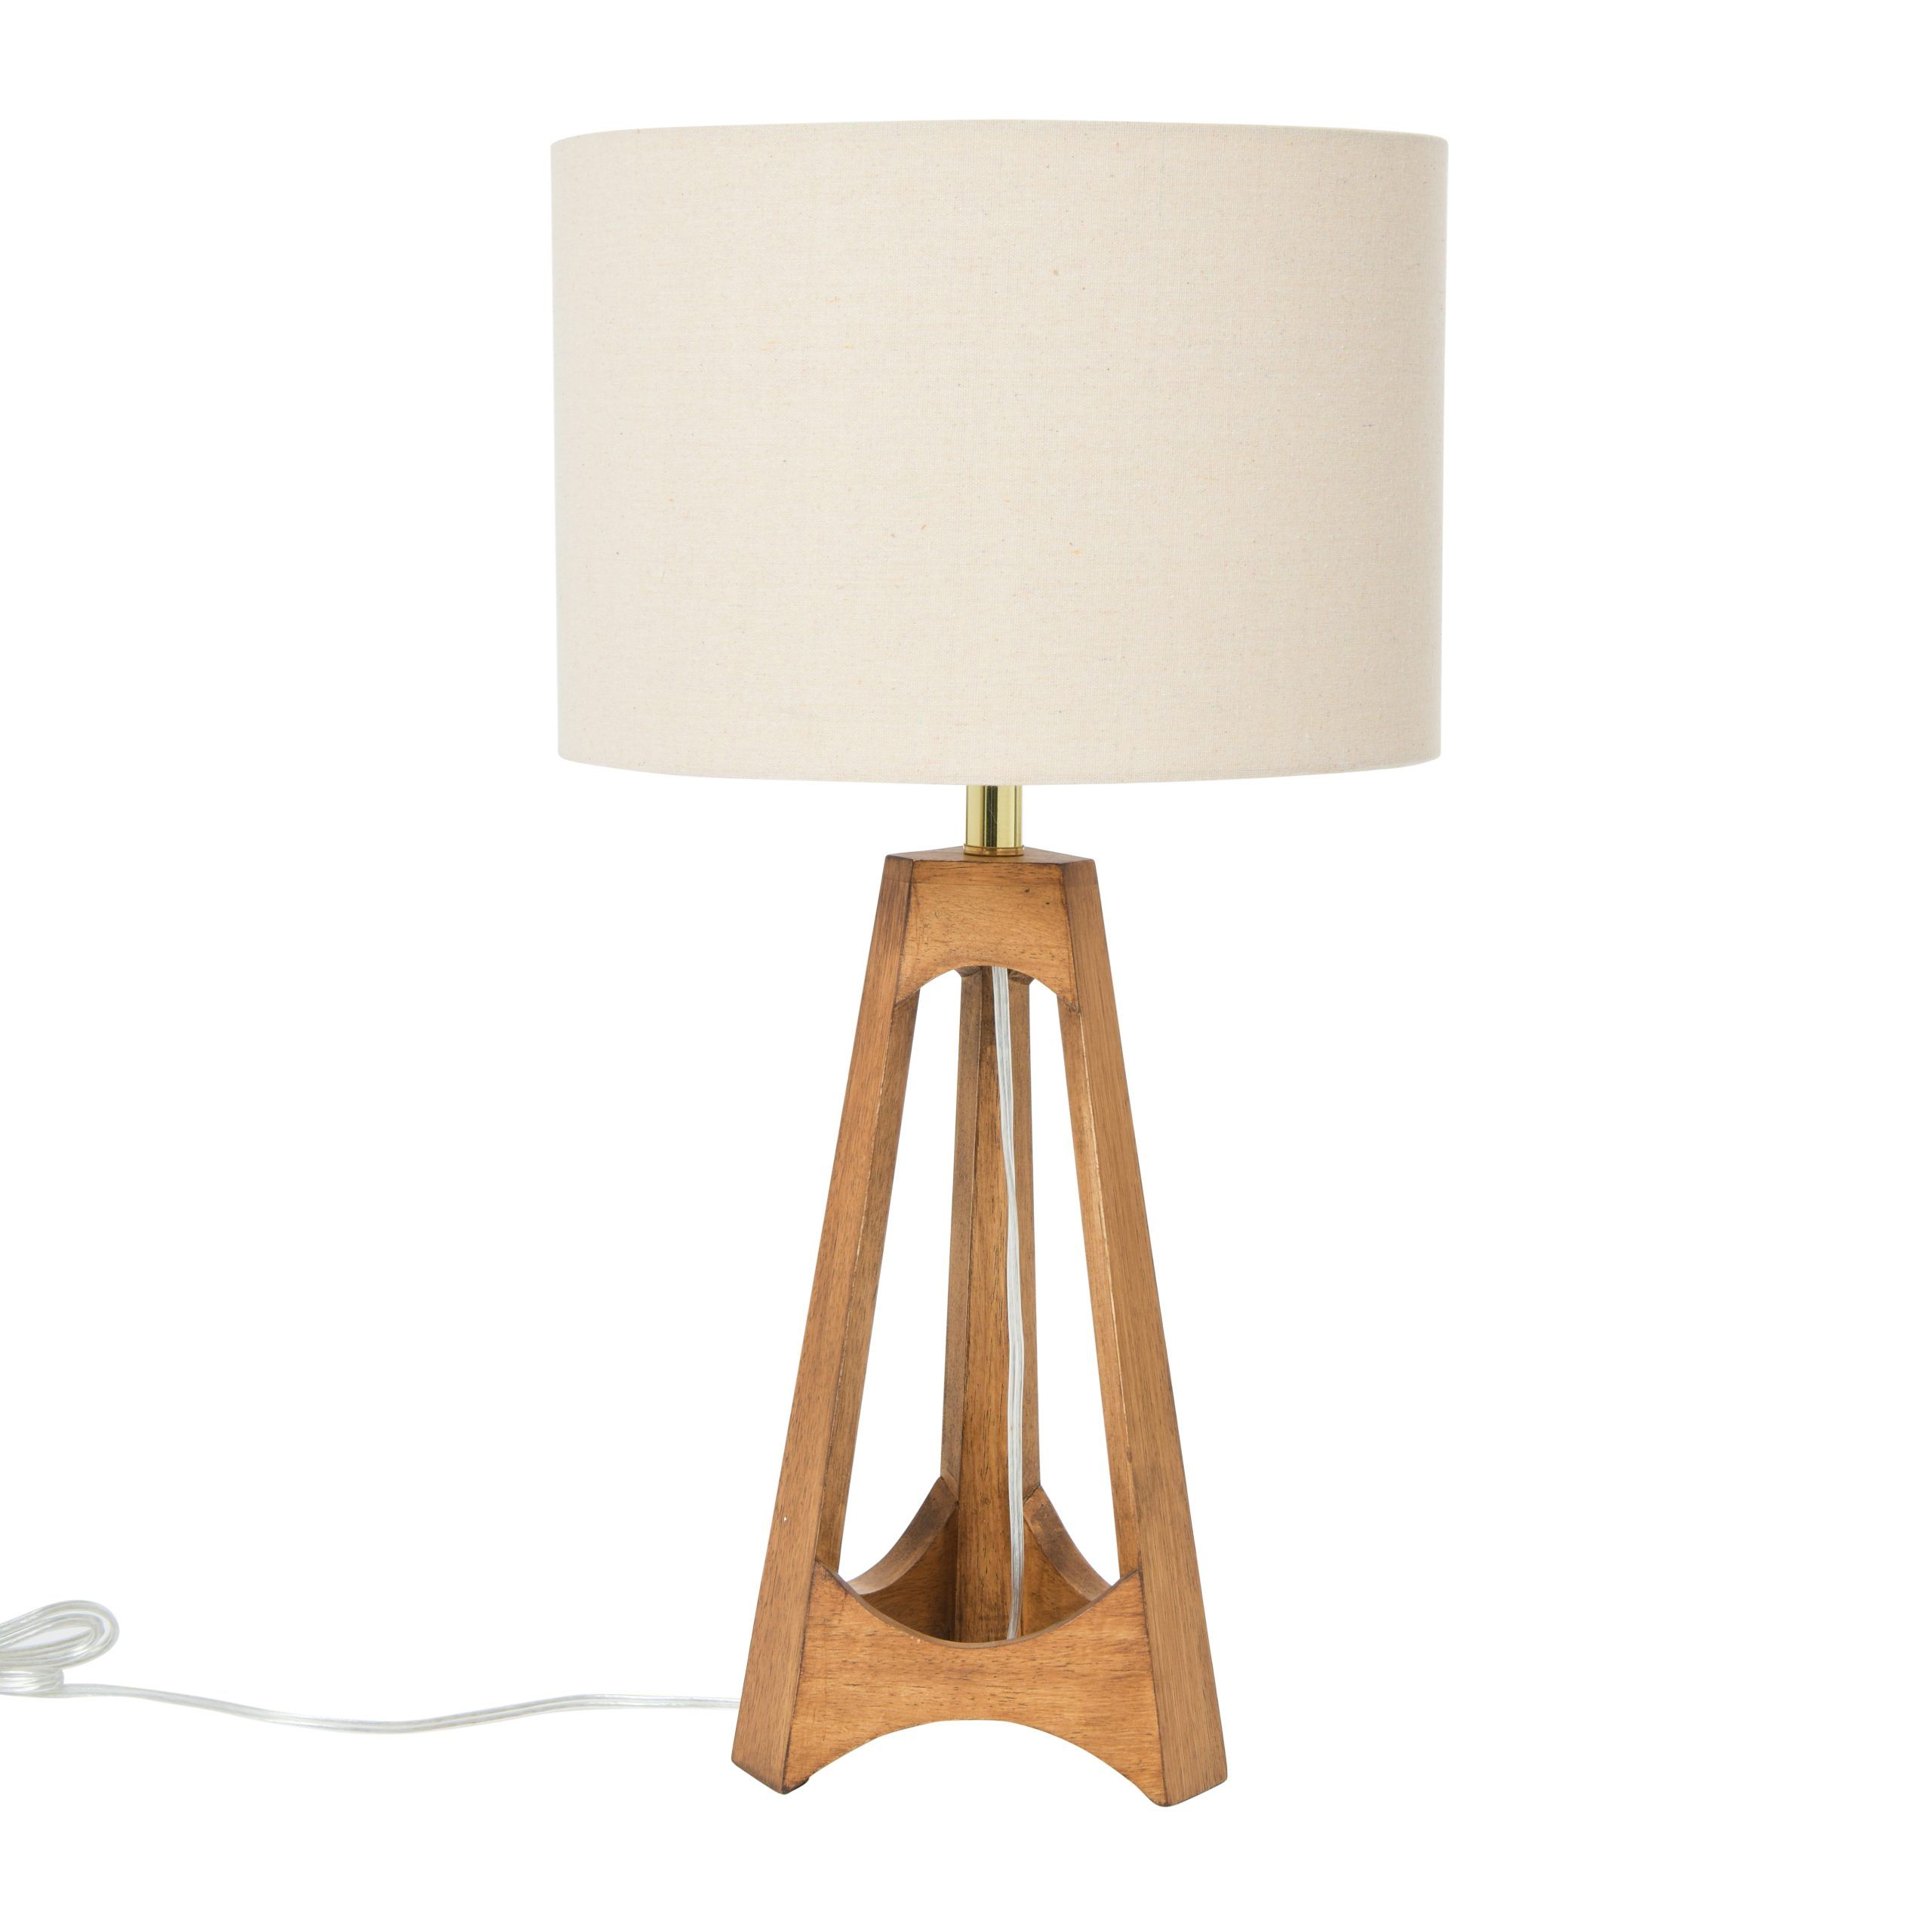 Rubberwood Standing Lamps With Regard To Well Known Desert Fields A Frame Rubber Wood Table Lamp With Cream Linen Shade,  Espresso – Walmart (View 7 of 10)